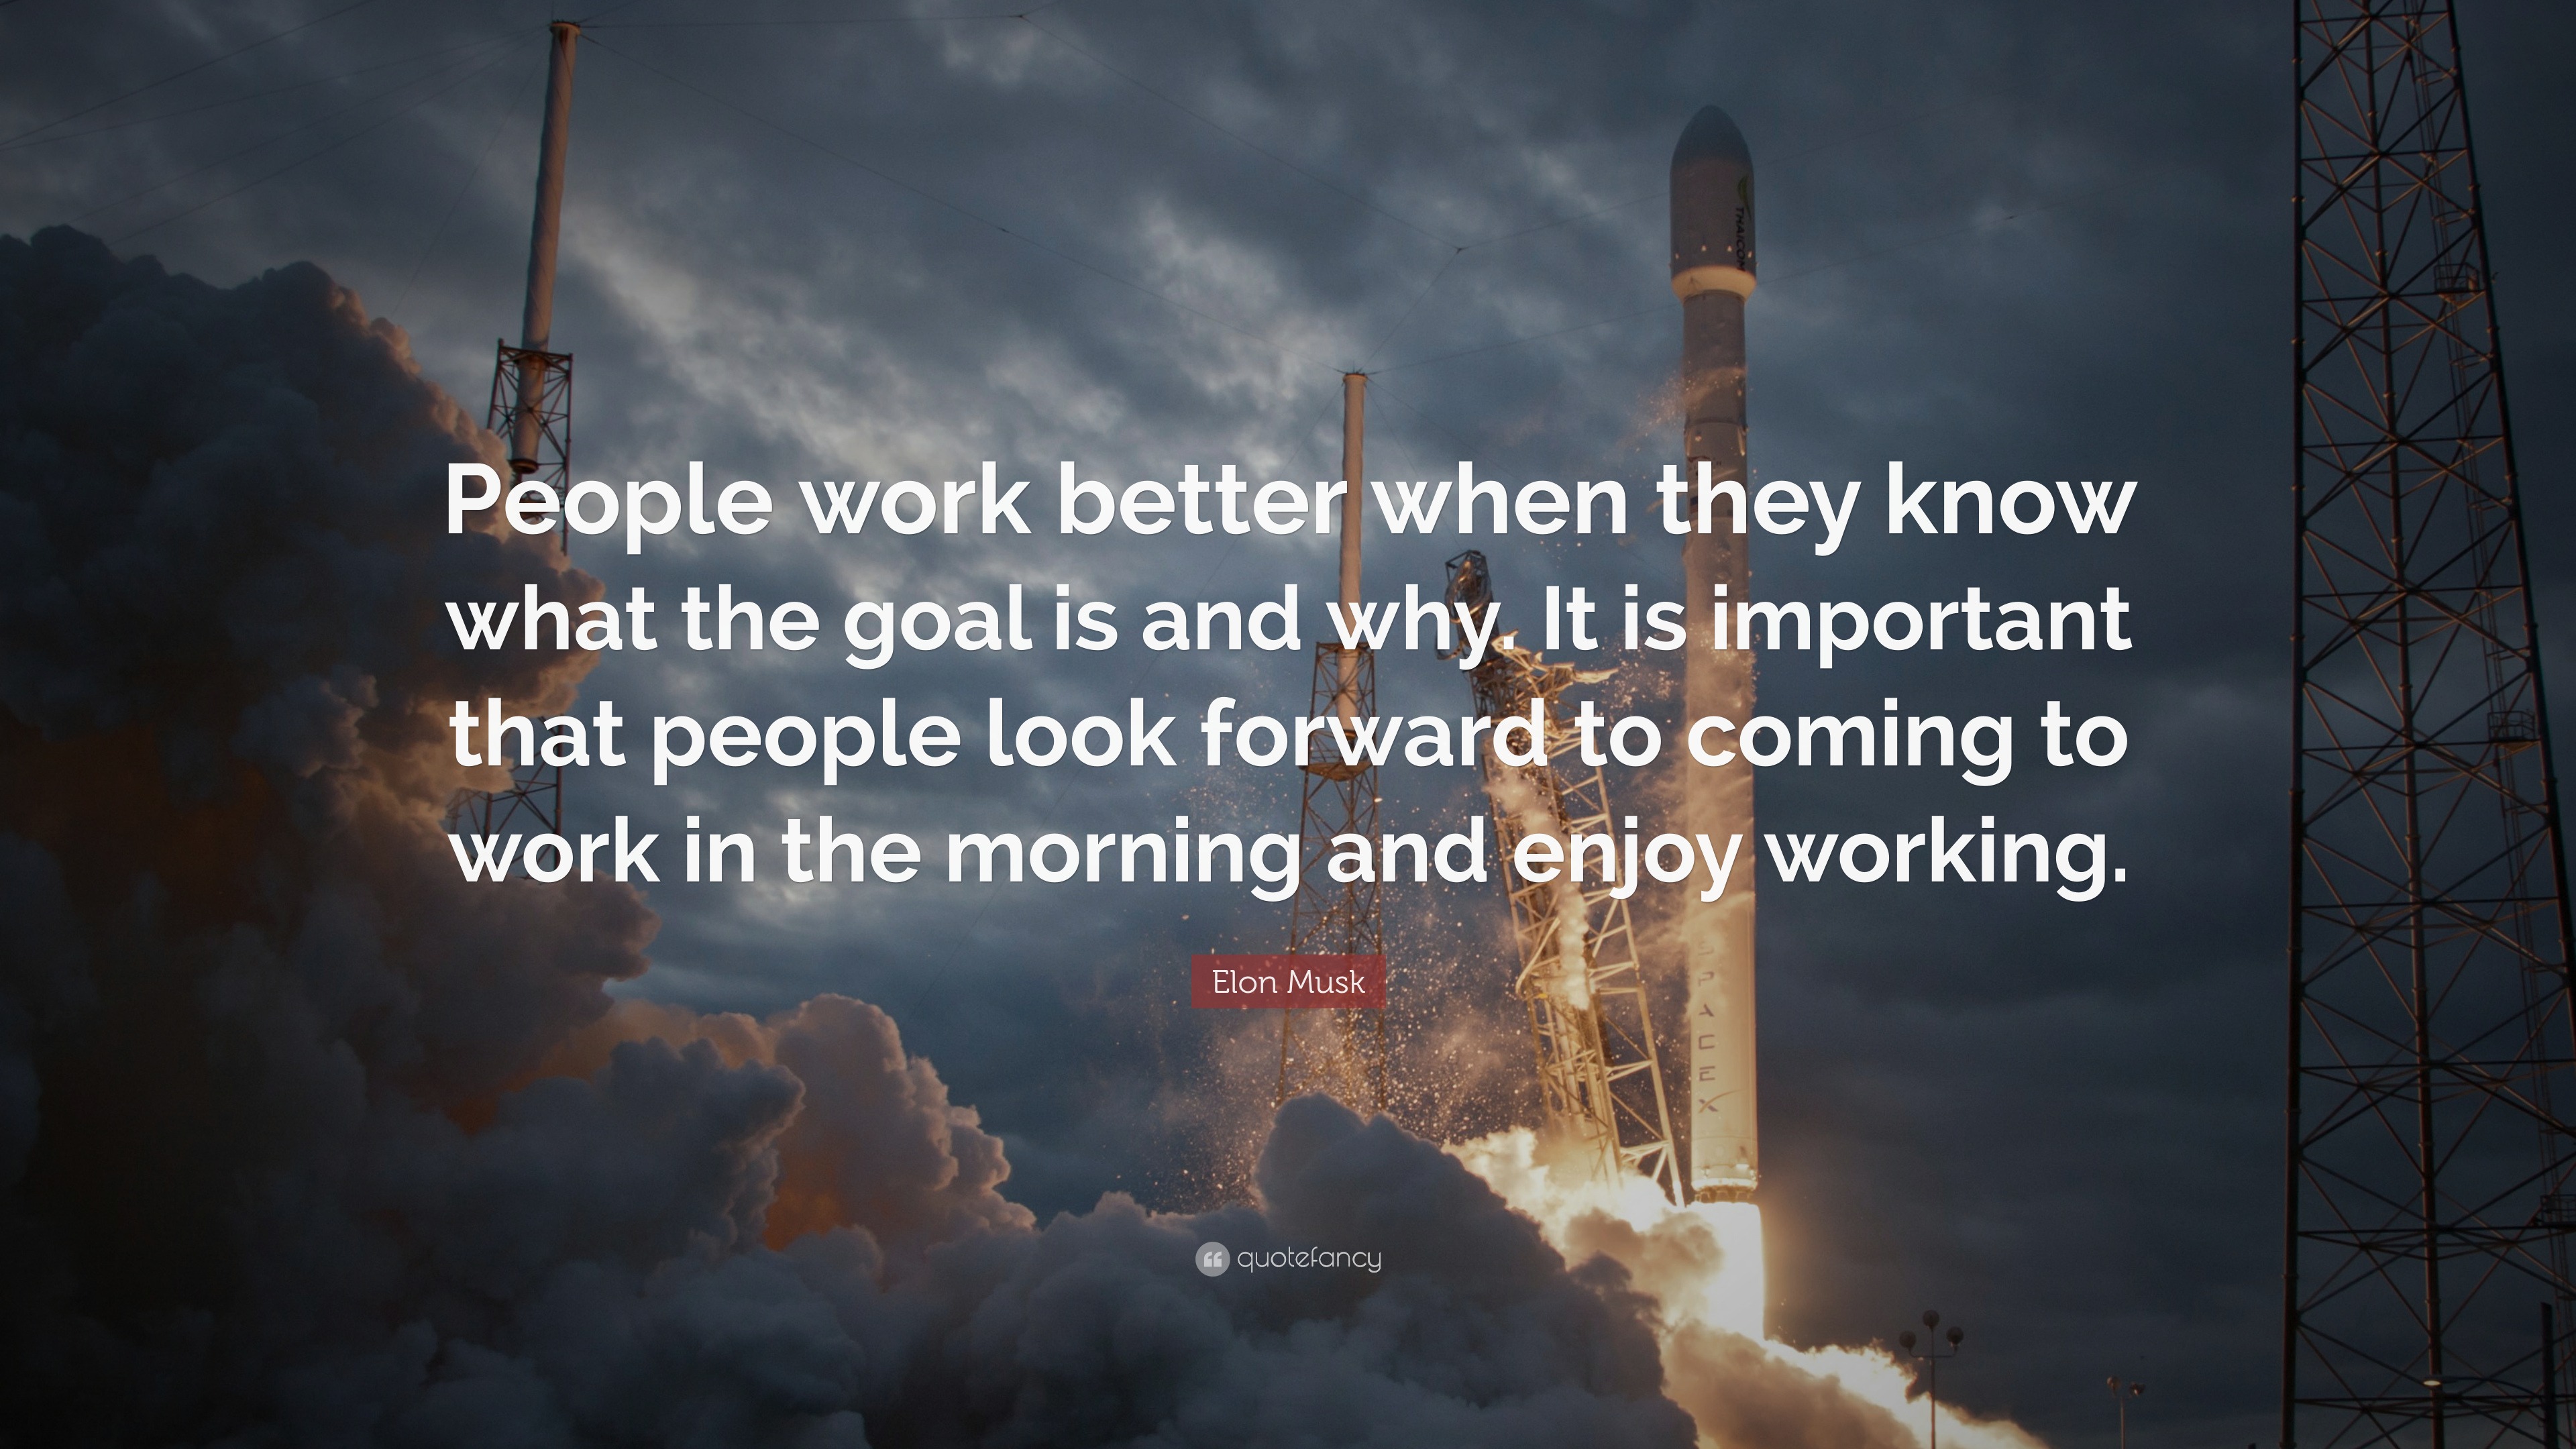 Elon Musk Quote: “People work better when they know what the goal is